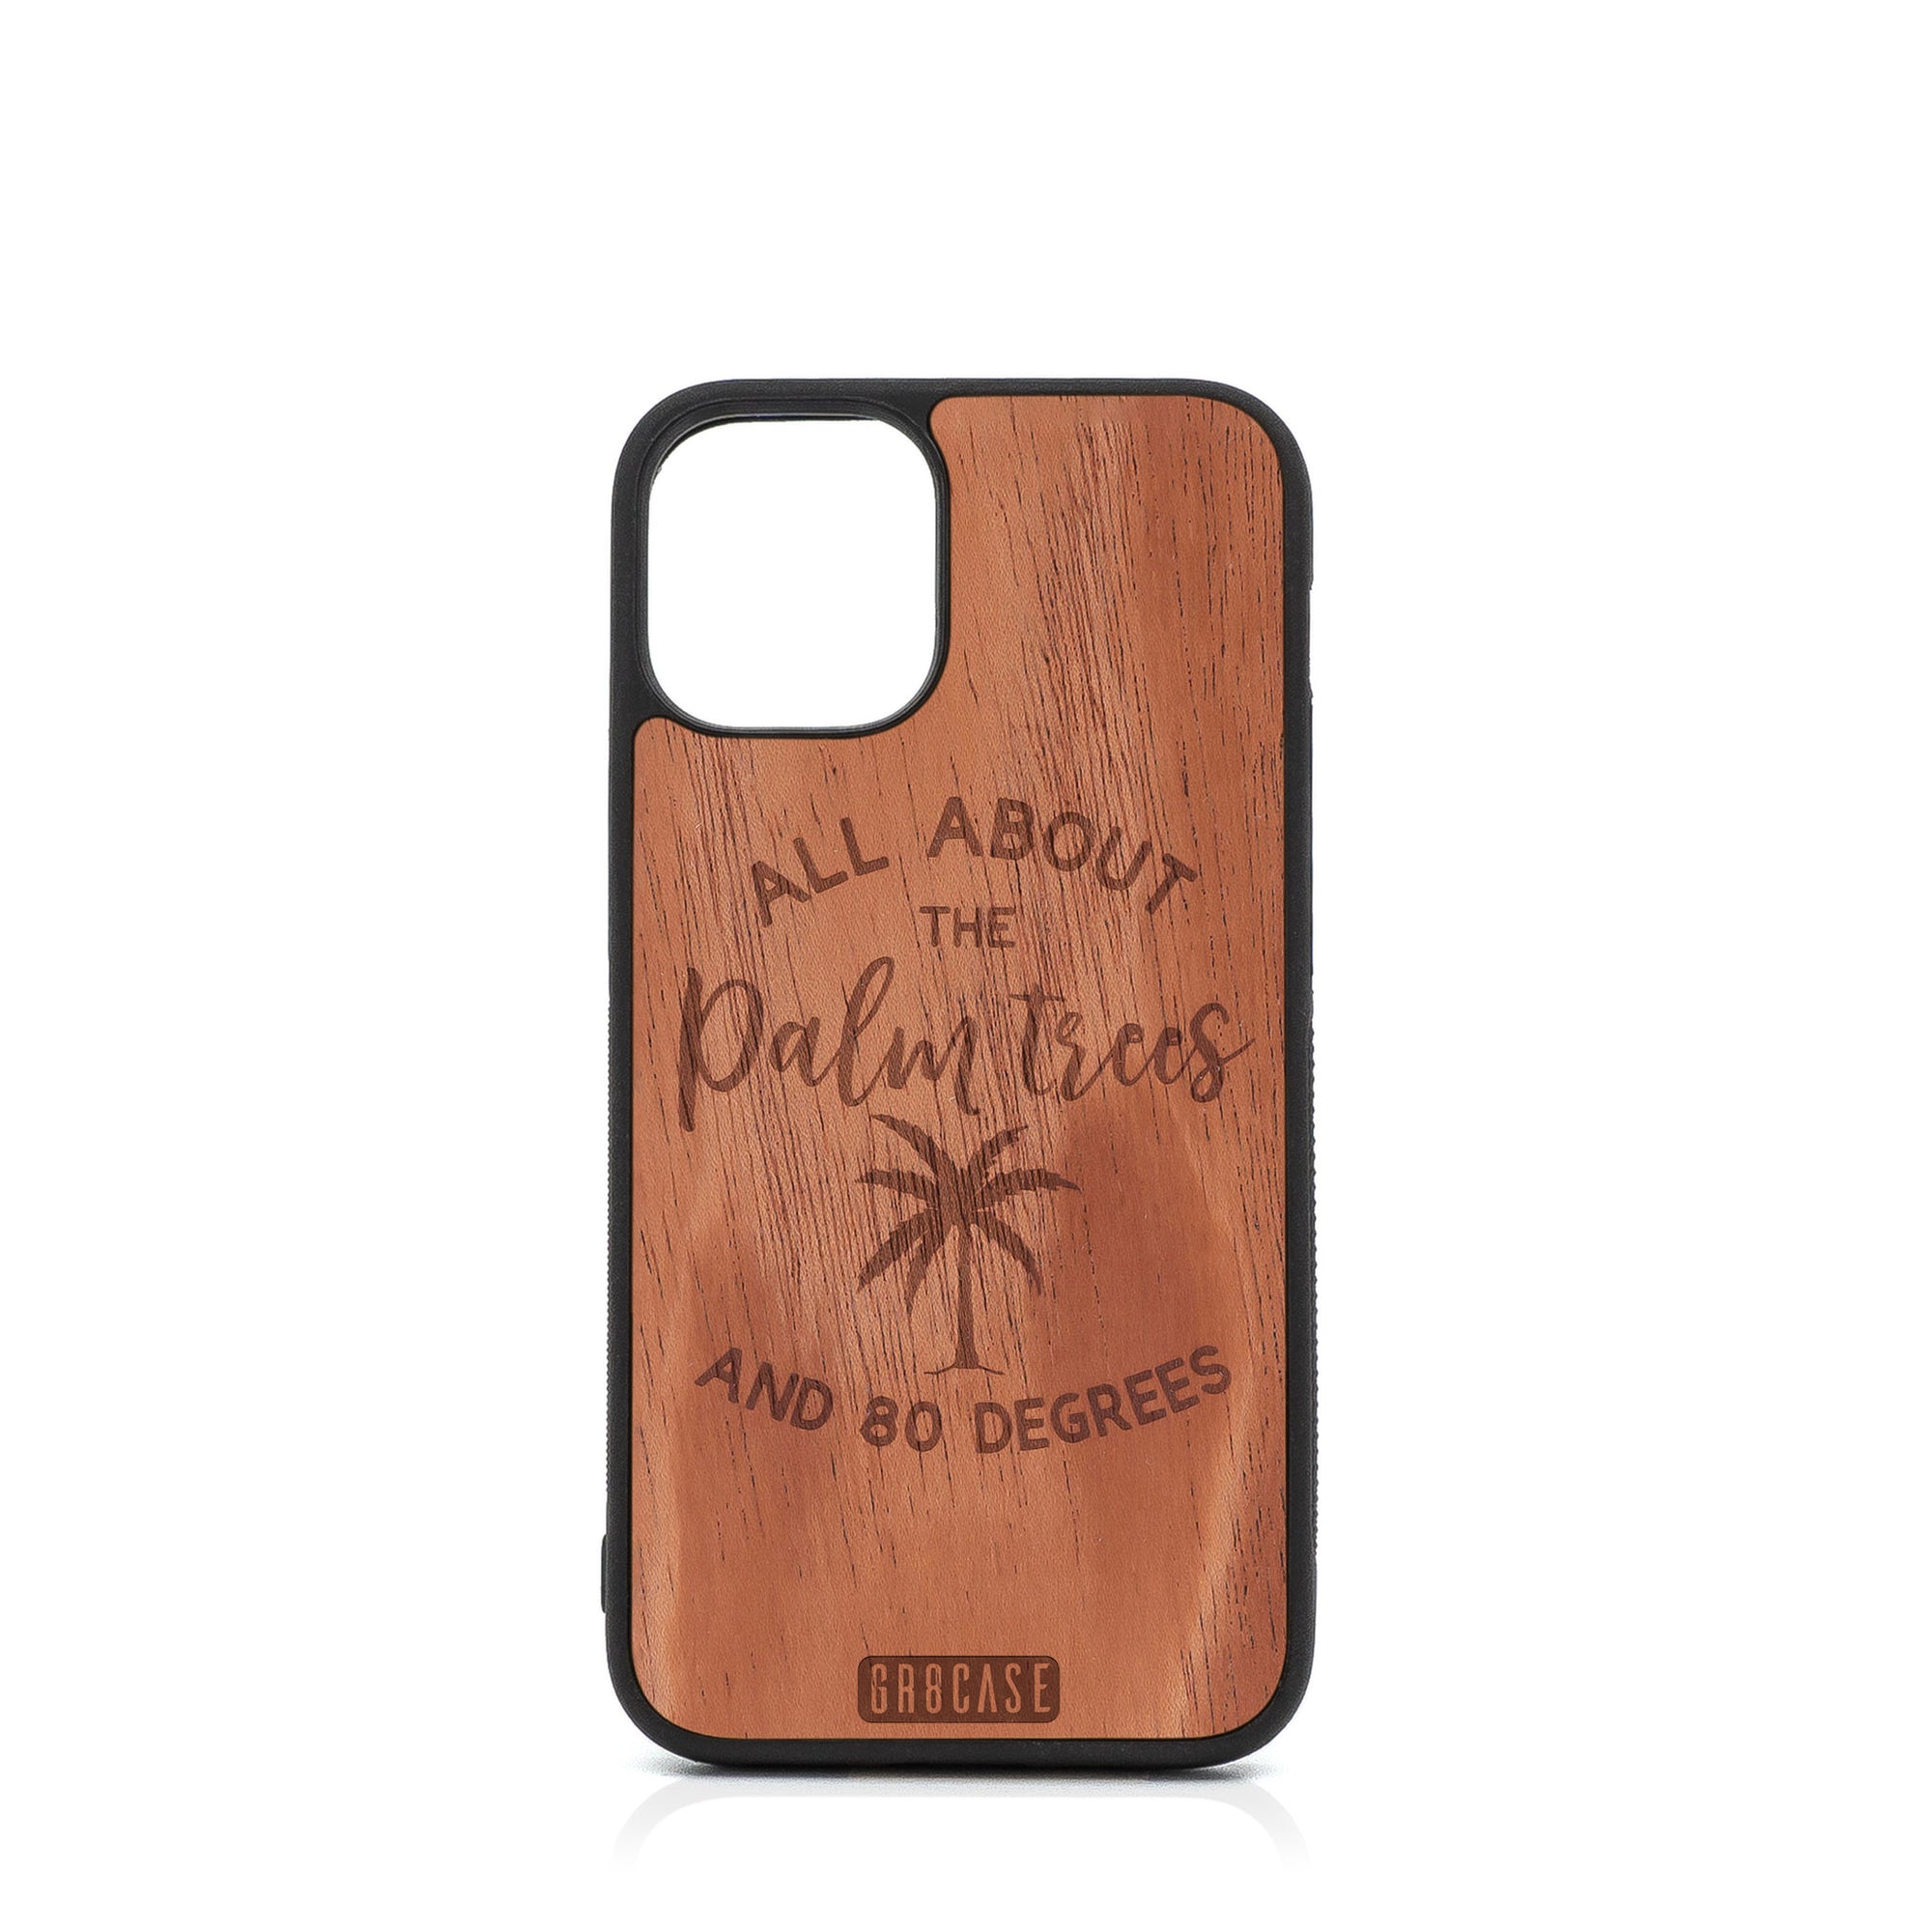 All About The Palm Trees And 80 Degrees Design Wood Case For iPhone 12